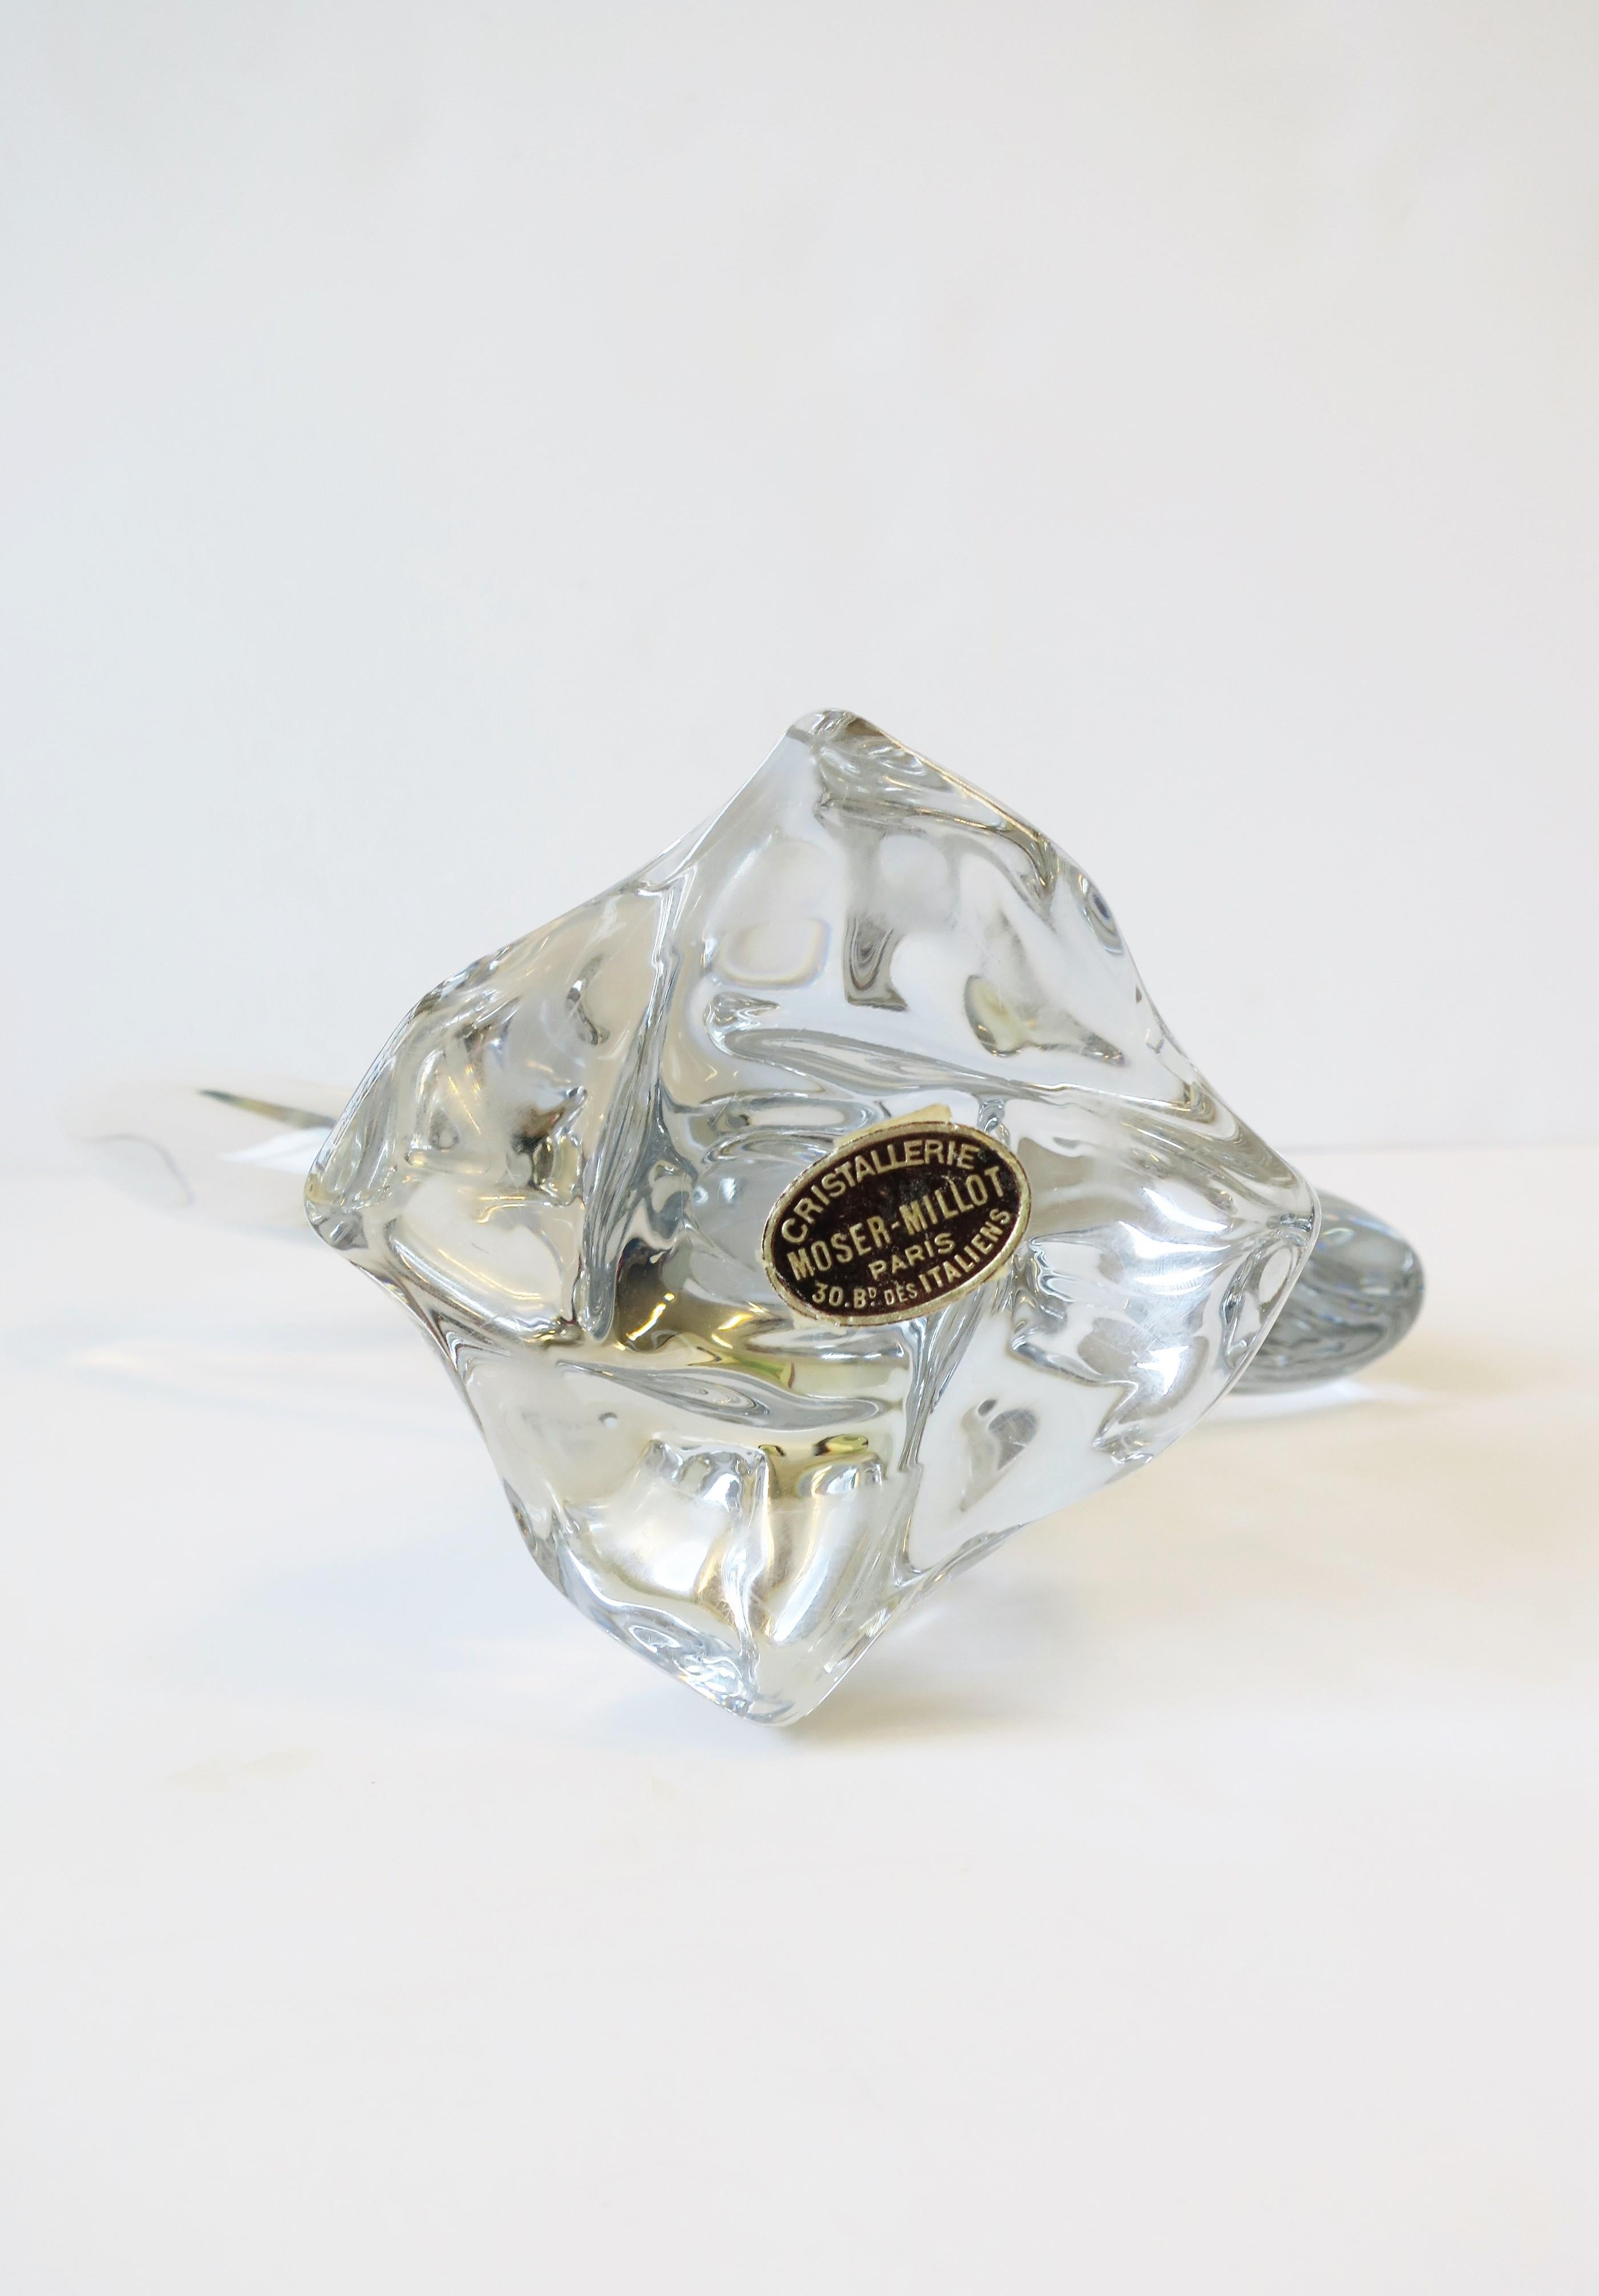 French Moser-Millot Paris Crystal Art Glass Fish Sculpture Decorative Object  For Sale 7